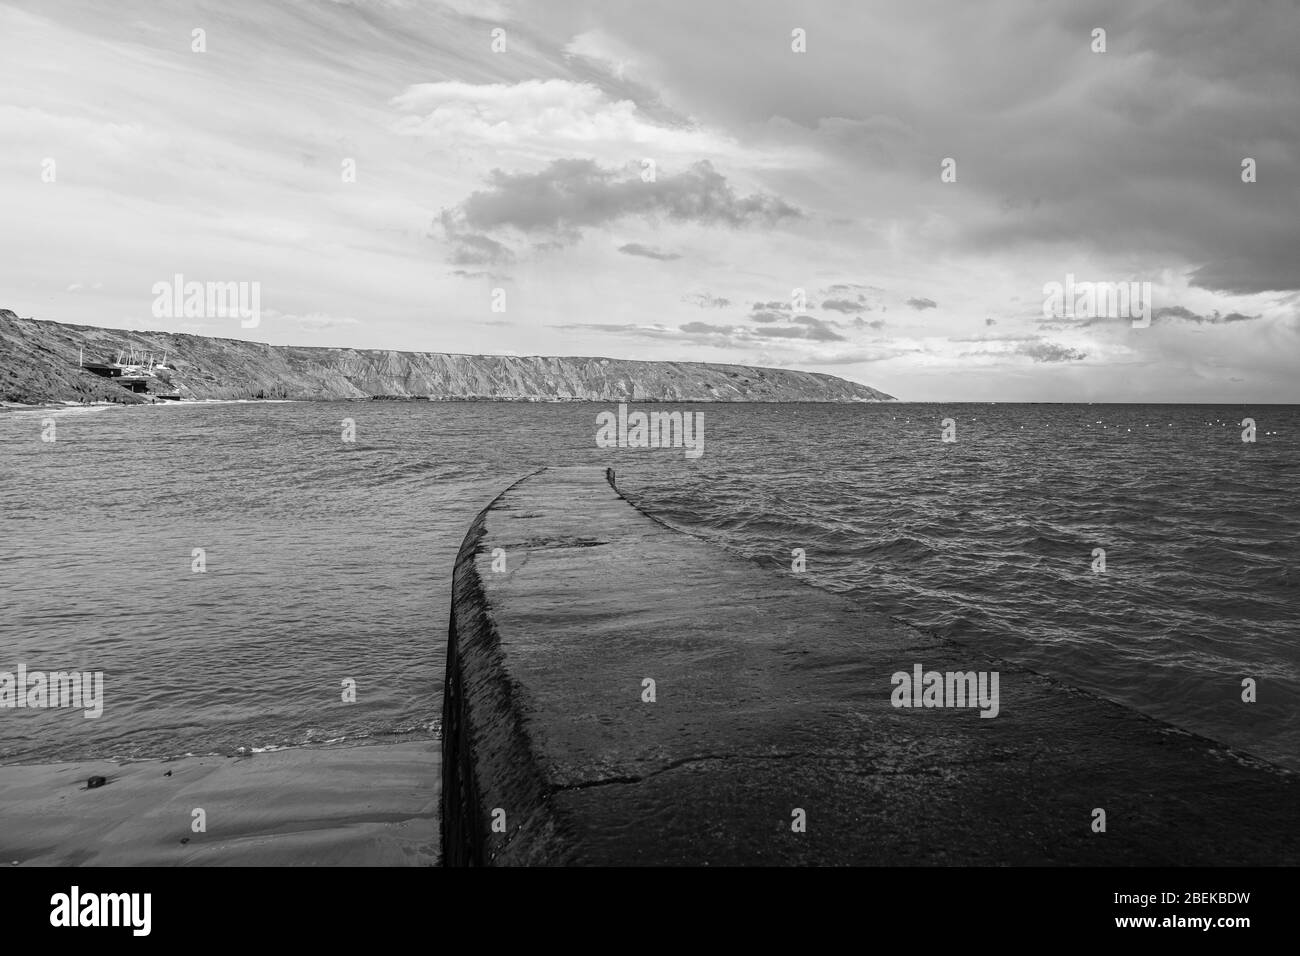 Filey Yorkshire, in Black and White. Stock Photo